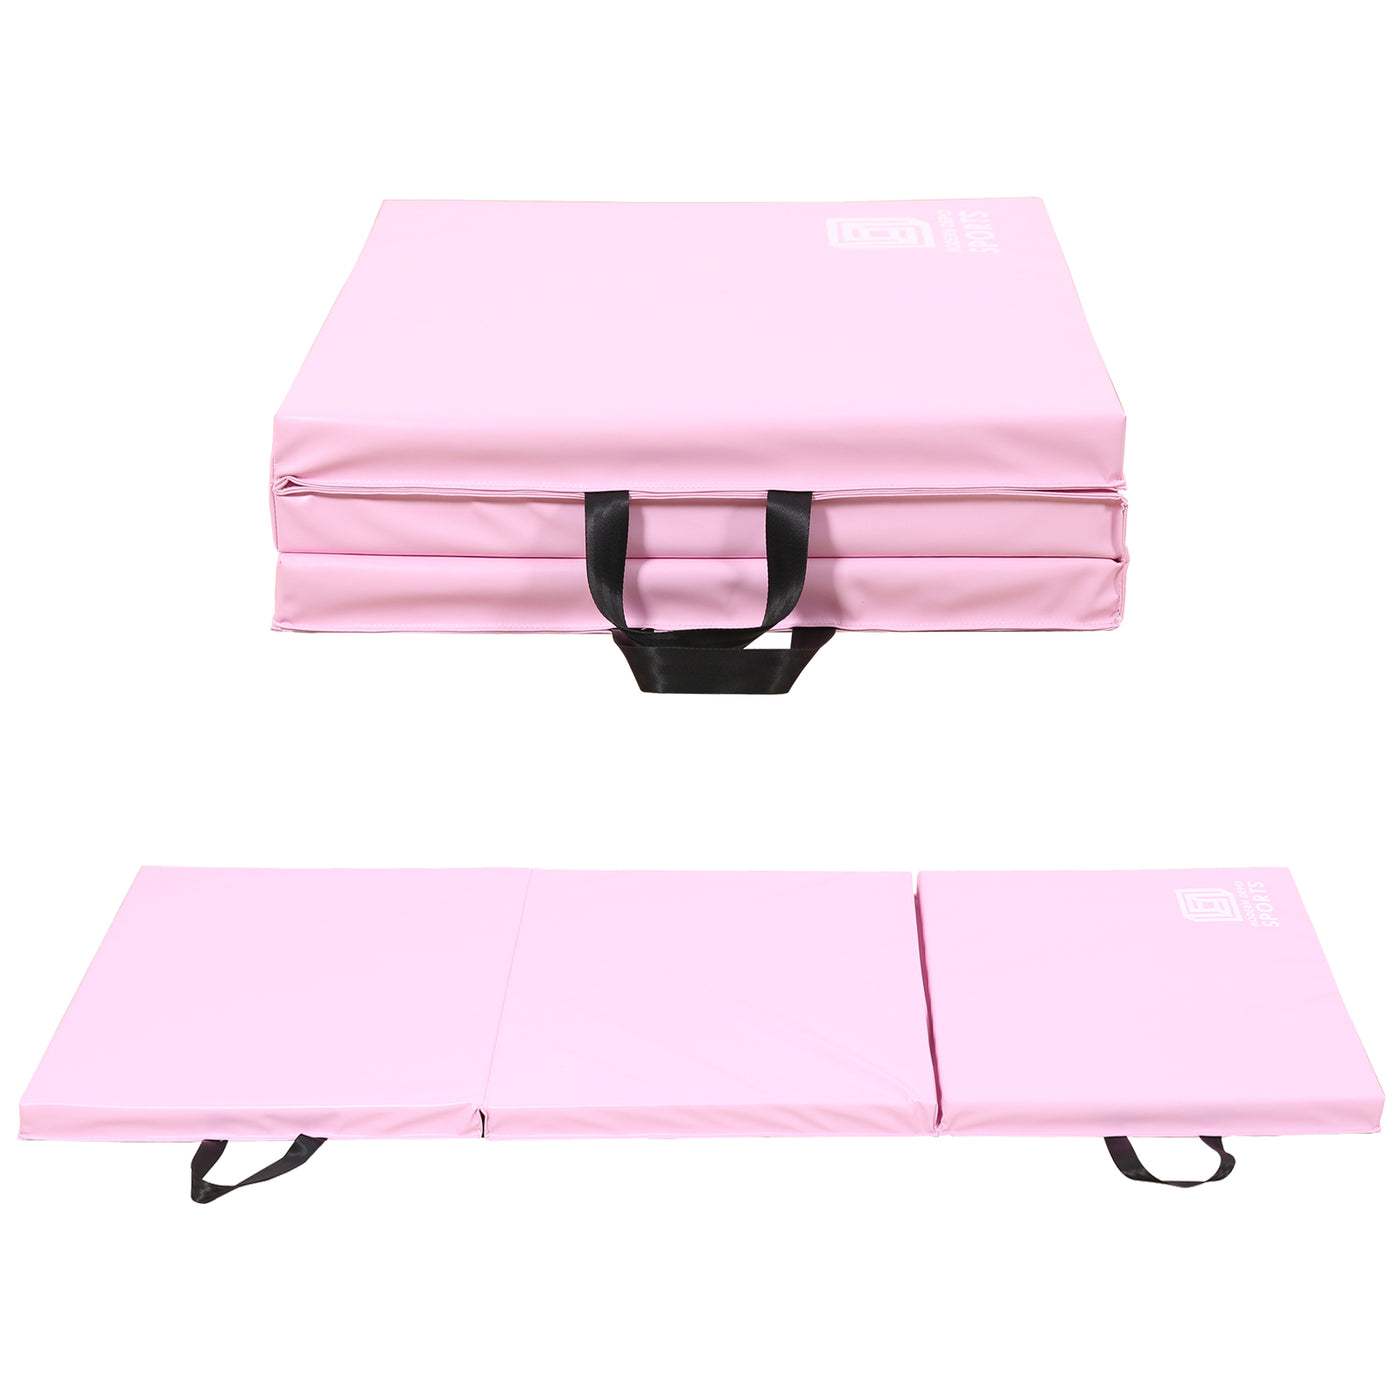 Gymnastics Mat 6'x2'x2" Foldable Tumbling Mats with Carrying Handles Three Fold Thick Exercise Mat for Home Aerobics Stretching Yoga